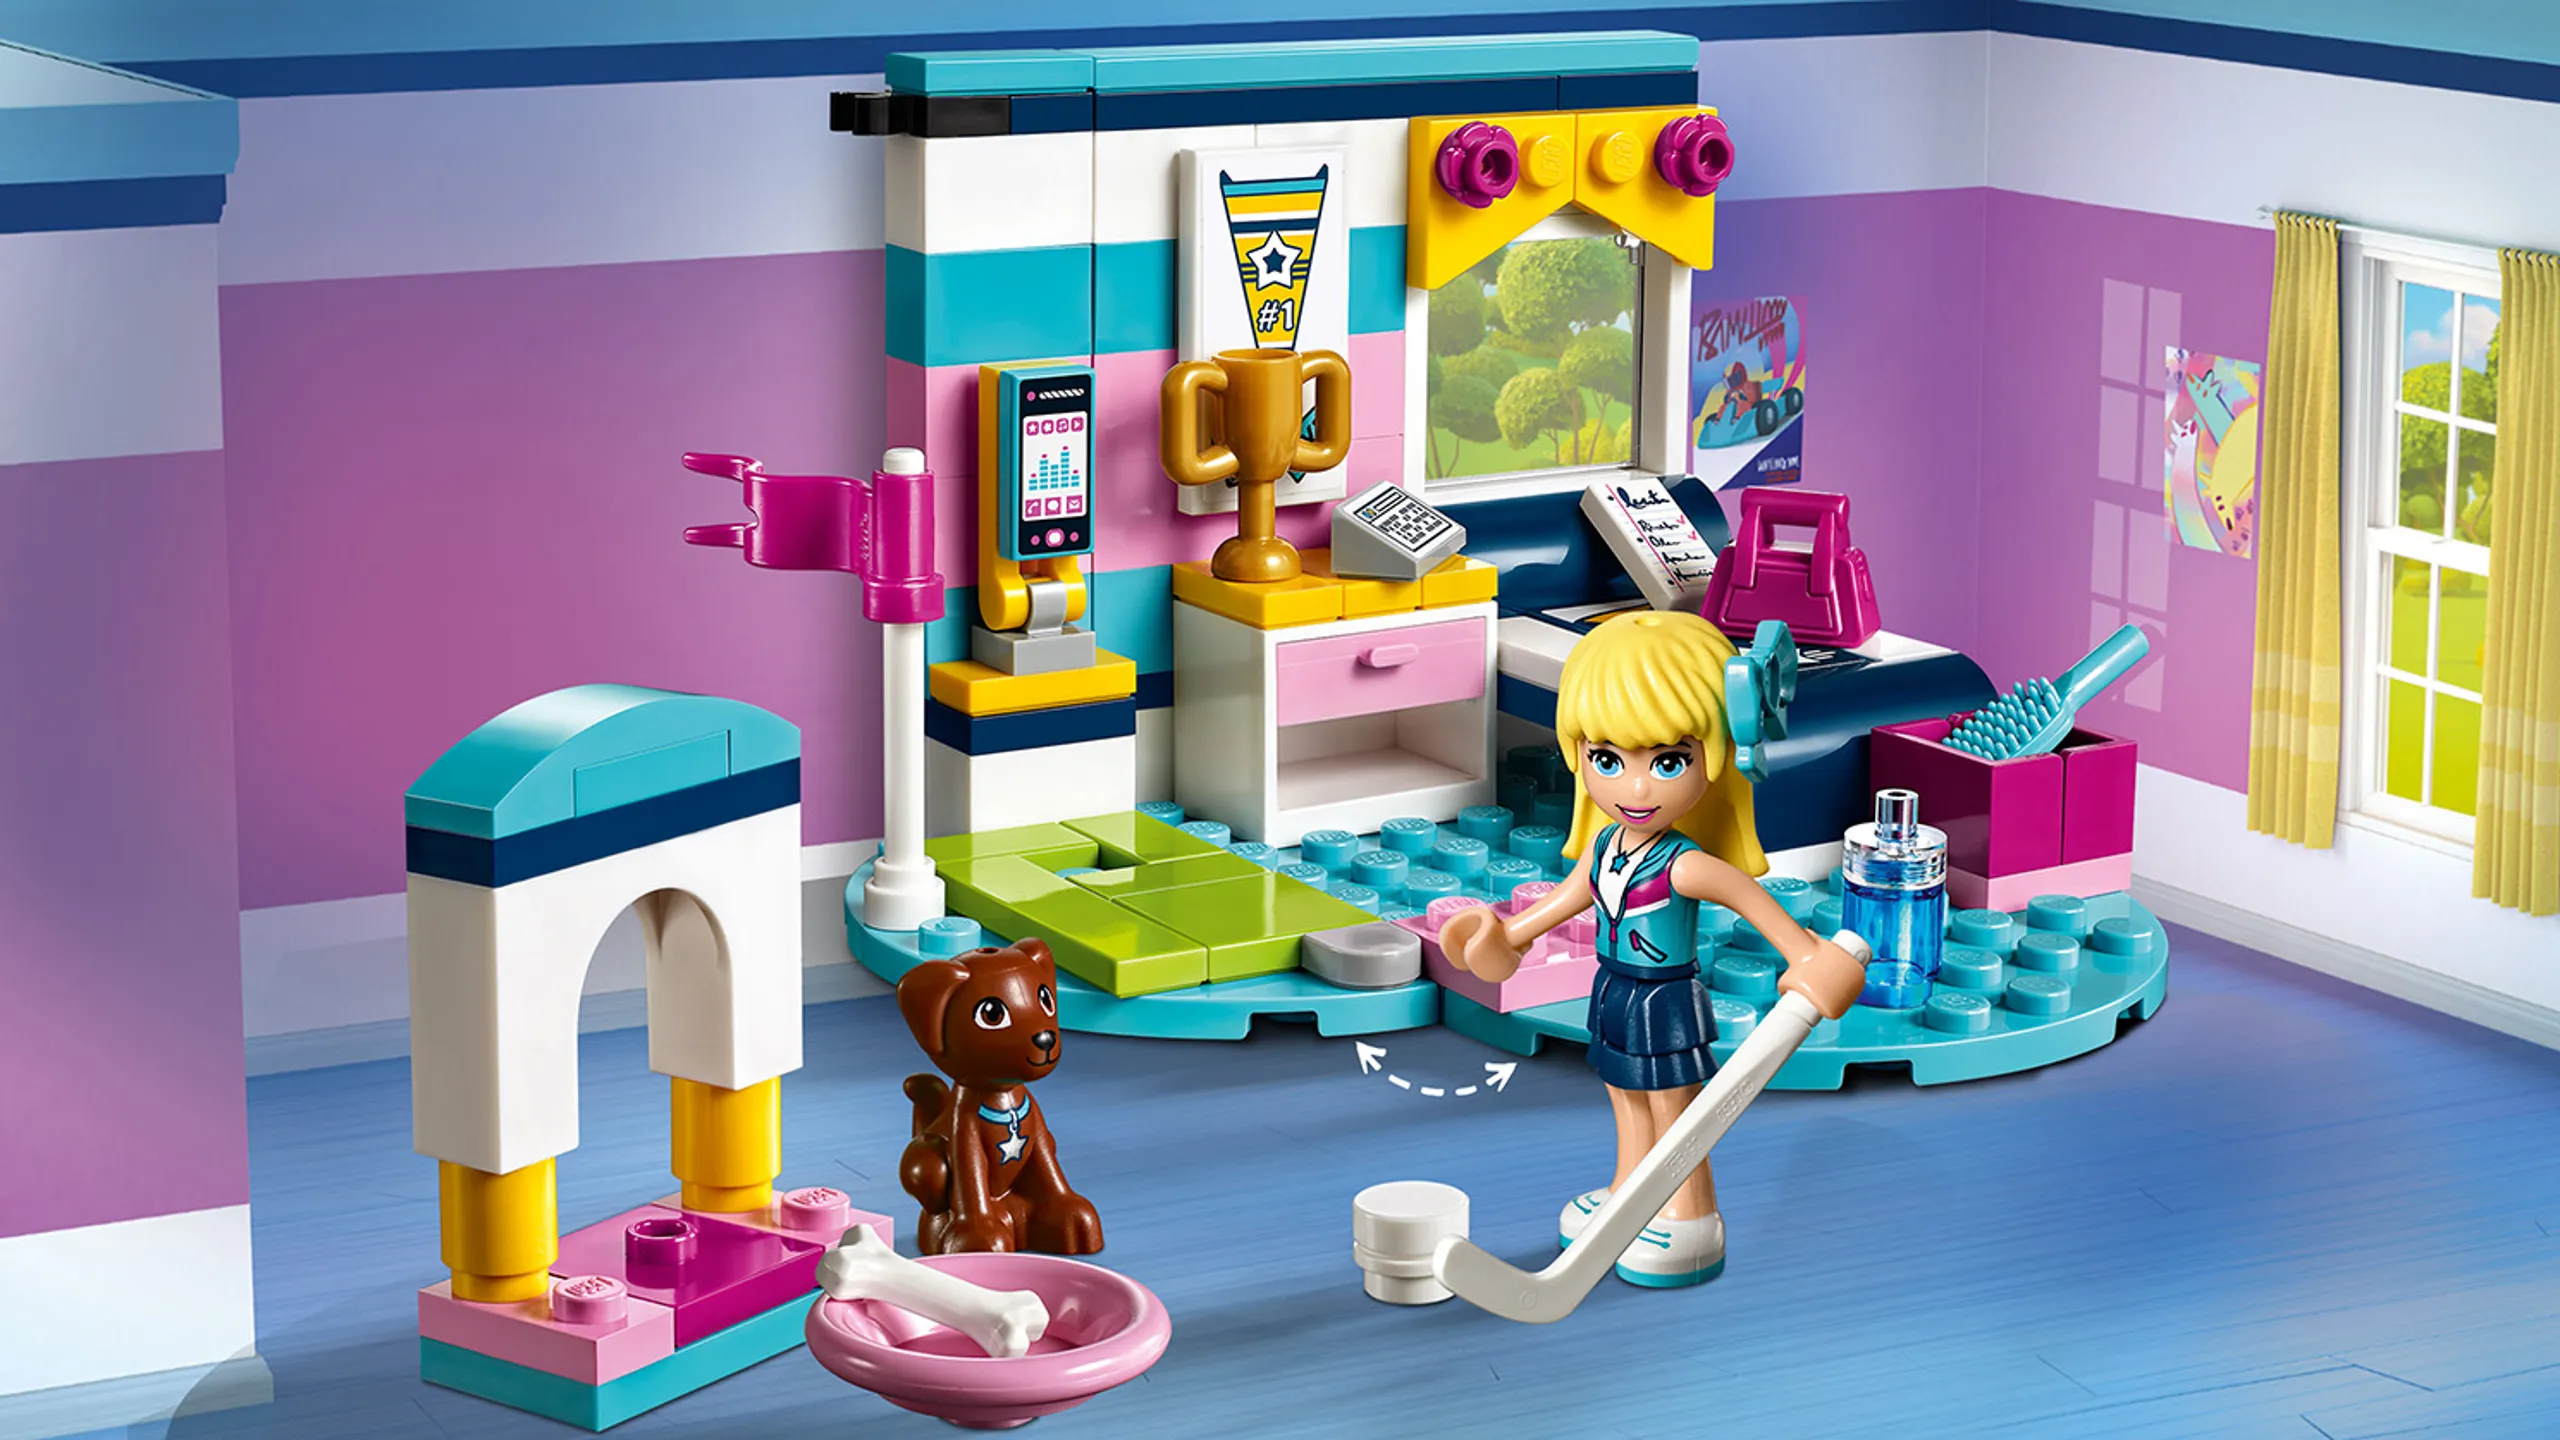 LEGO Friends Stephanie's Bedroom - 41328 - Stephanie’s own personal mini golf putting green and win one of her many sporting trophies. Lay down on the bed or play ball with the little dog Dash. Settle him down in his dog bed and give him a bone as a treat.